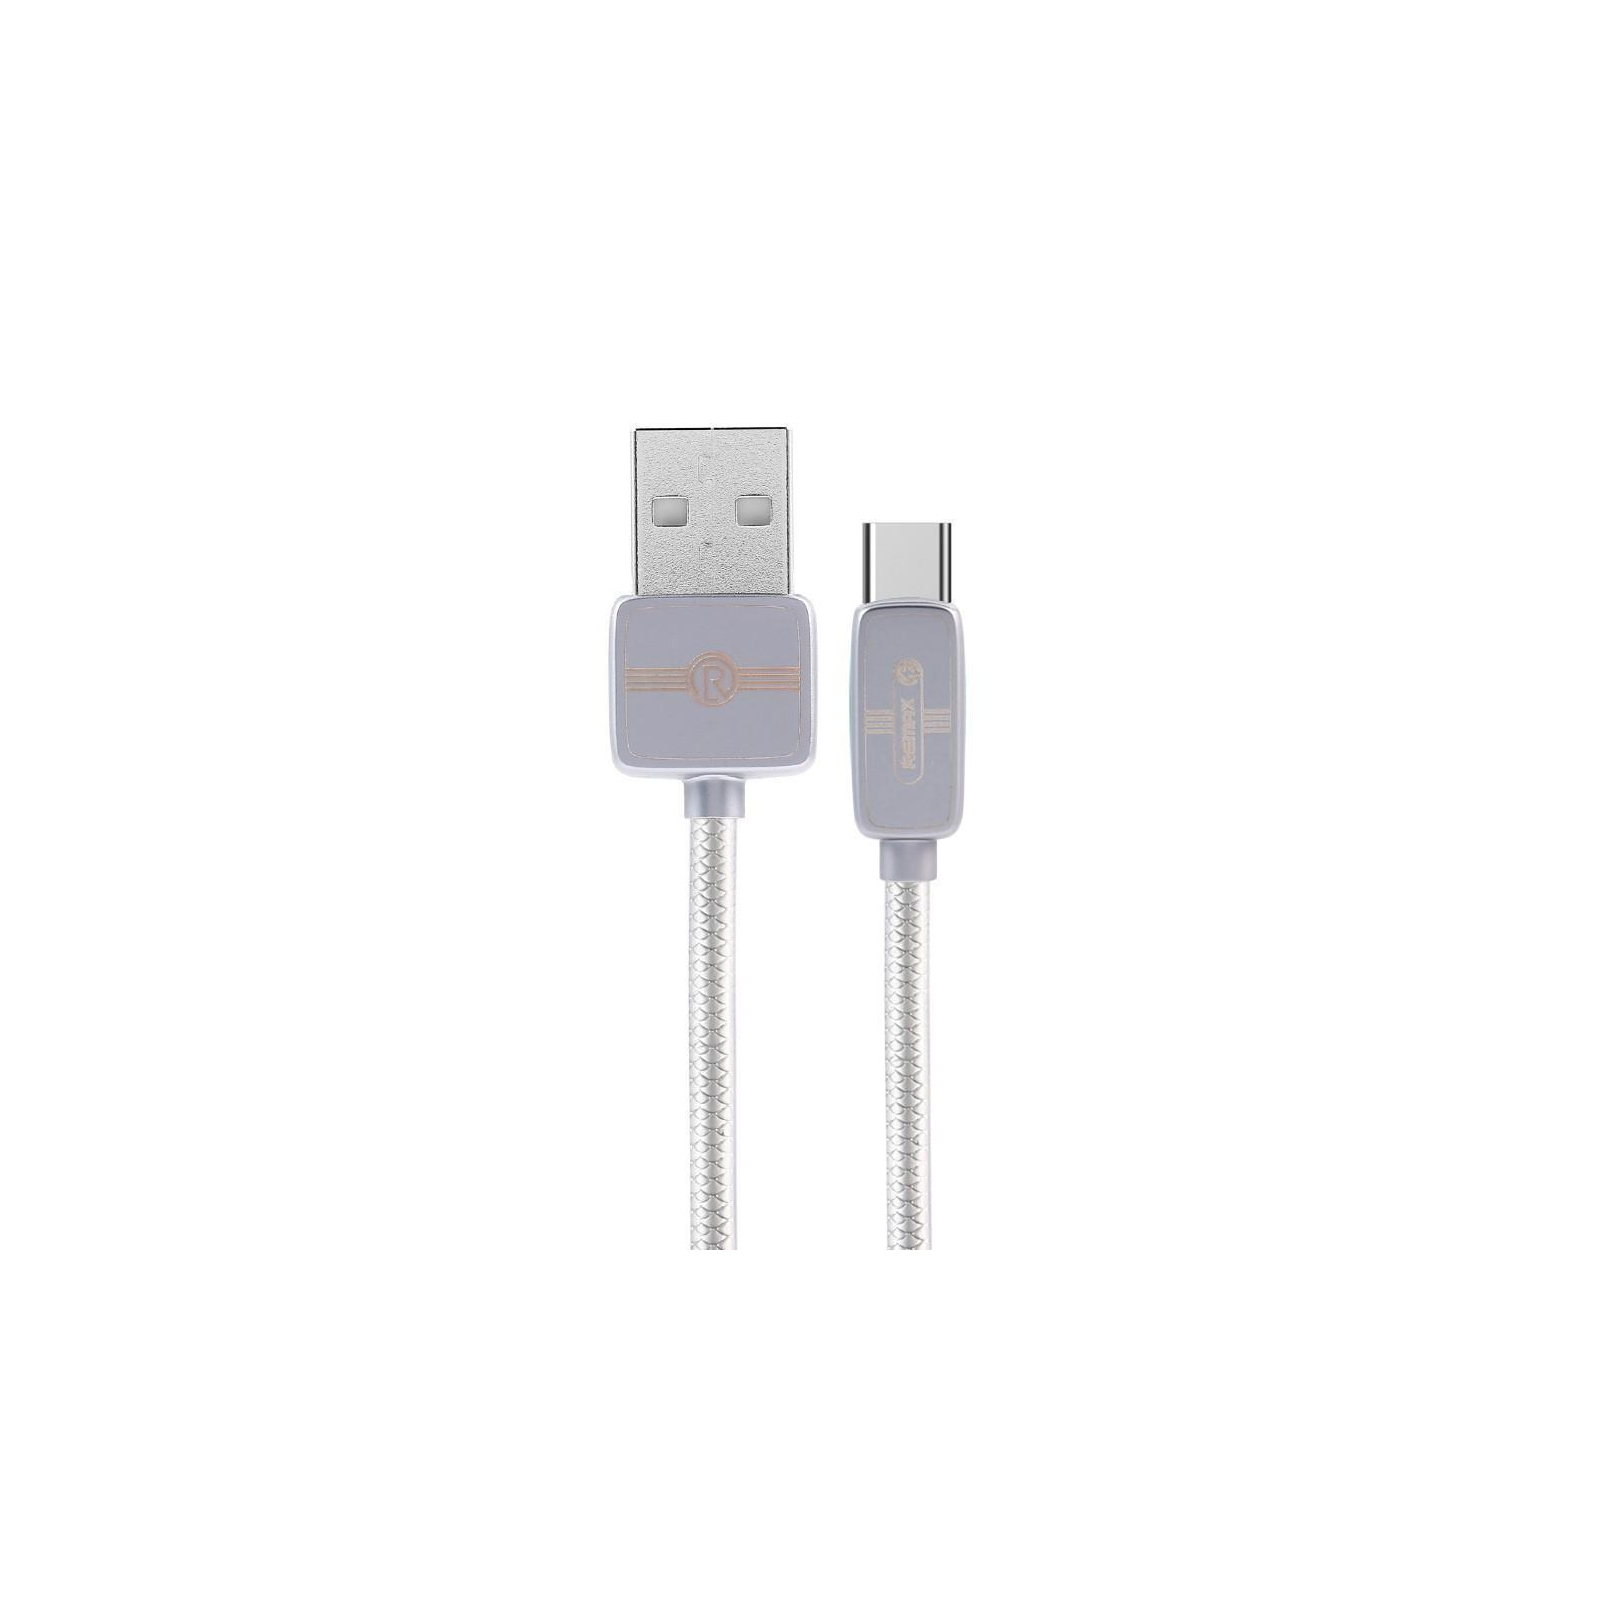 Дата кабель USB 2.0 AM to Type-C 1.0m Regor silver Remax (RC-098A-SILVER)